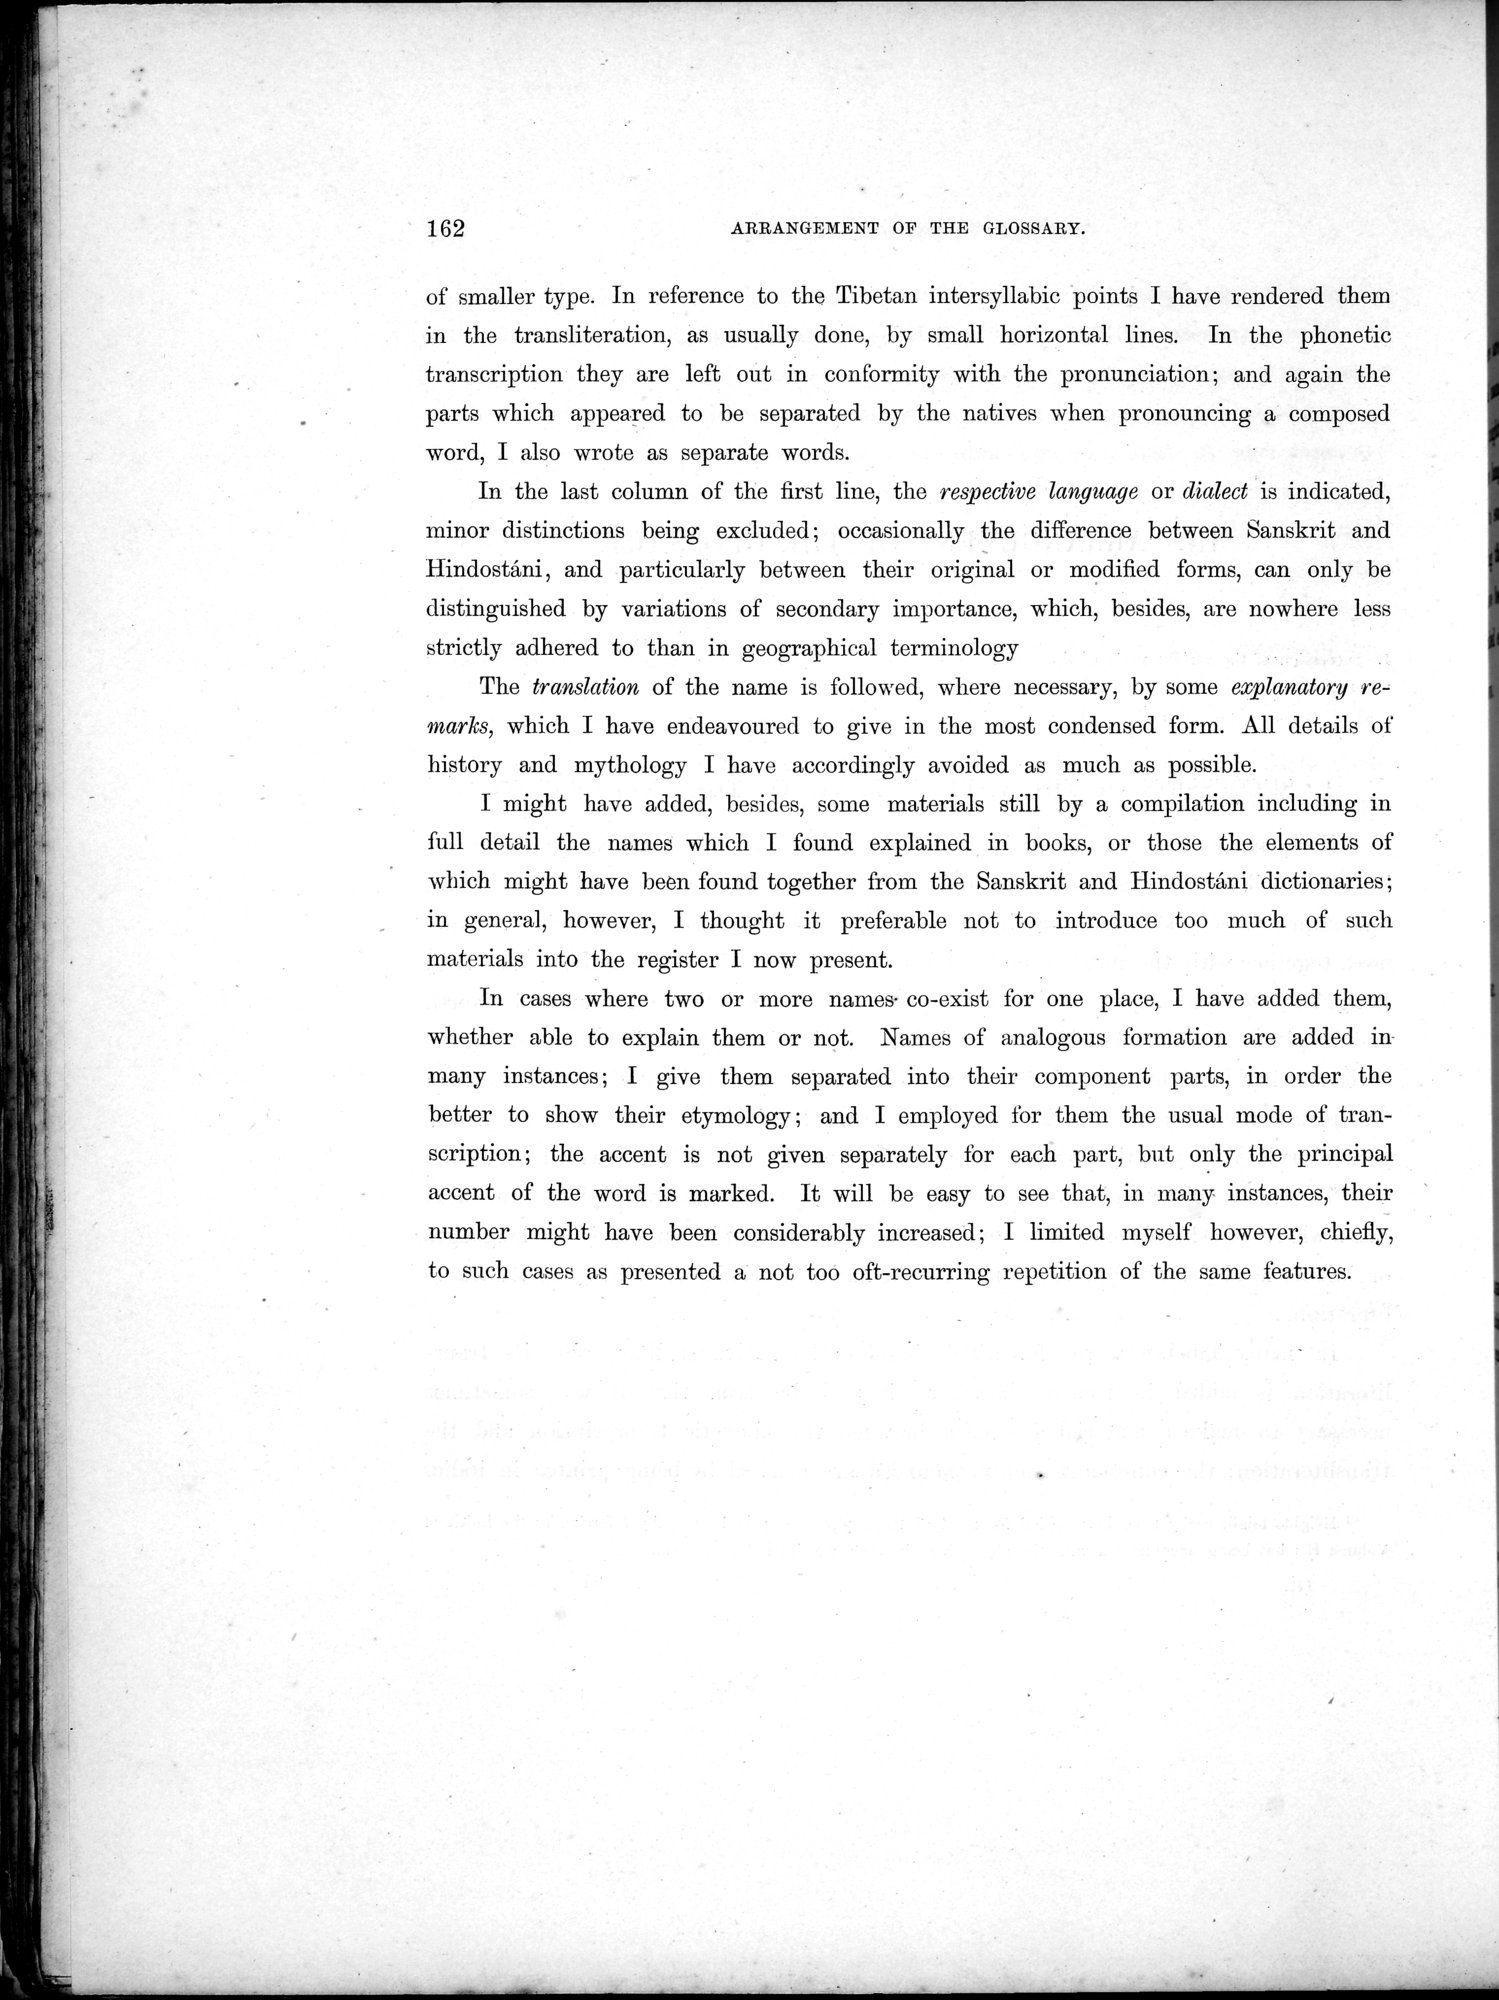 Results of a Scientific Mission to India and High Asia : vol.3 / Page 194 (Grayscale High Resolution Image)